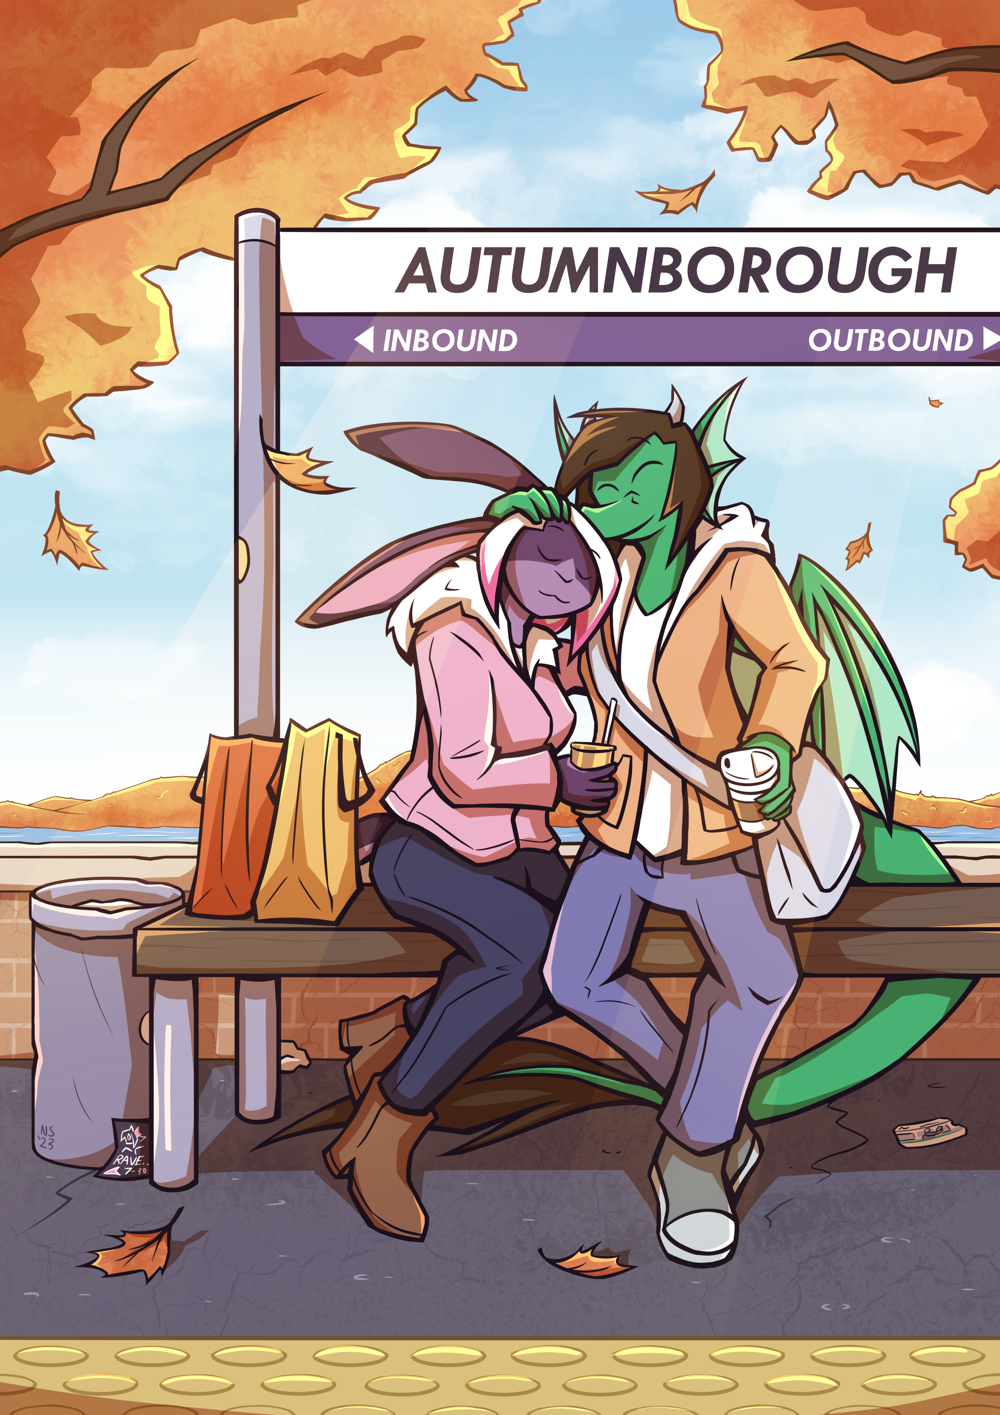 jade and iri sitting and waiting at a train station in fall